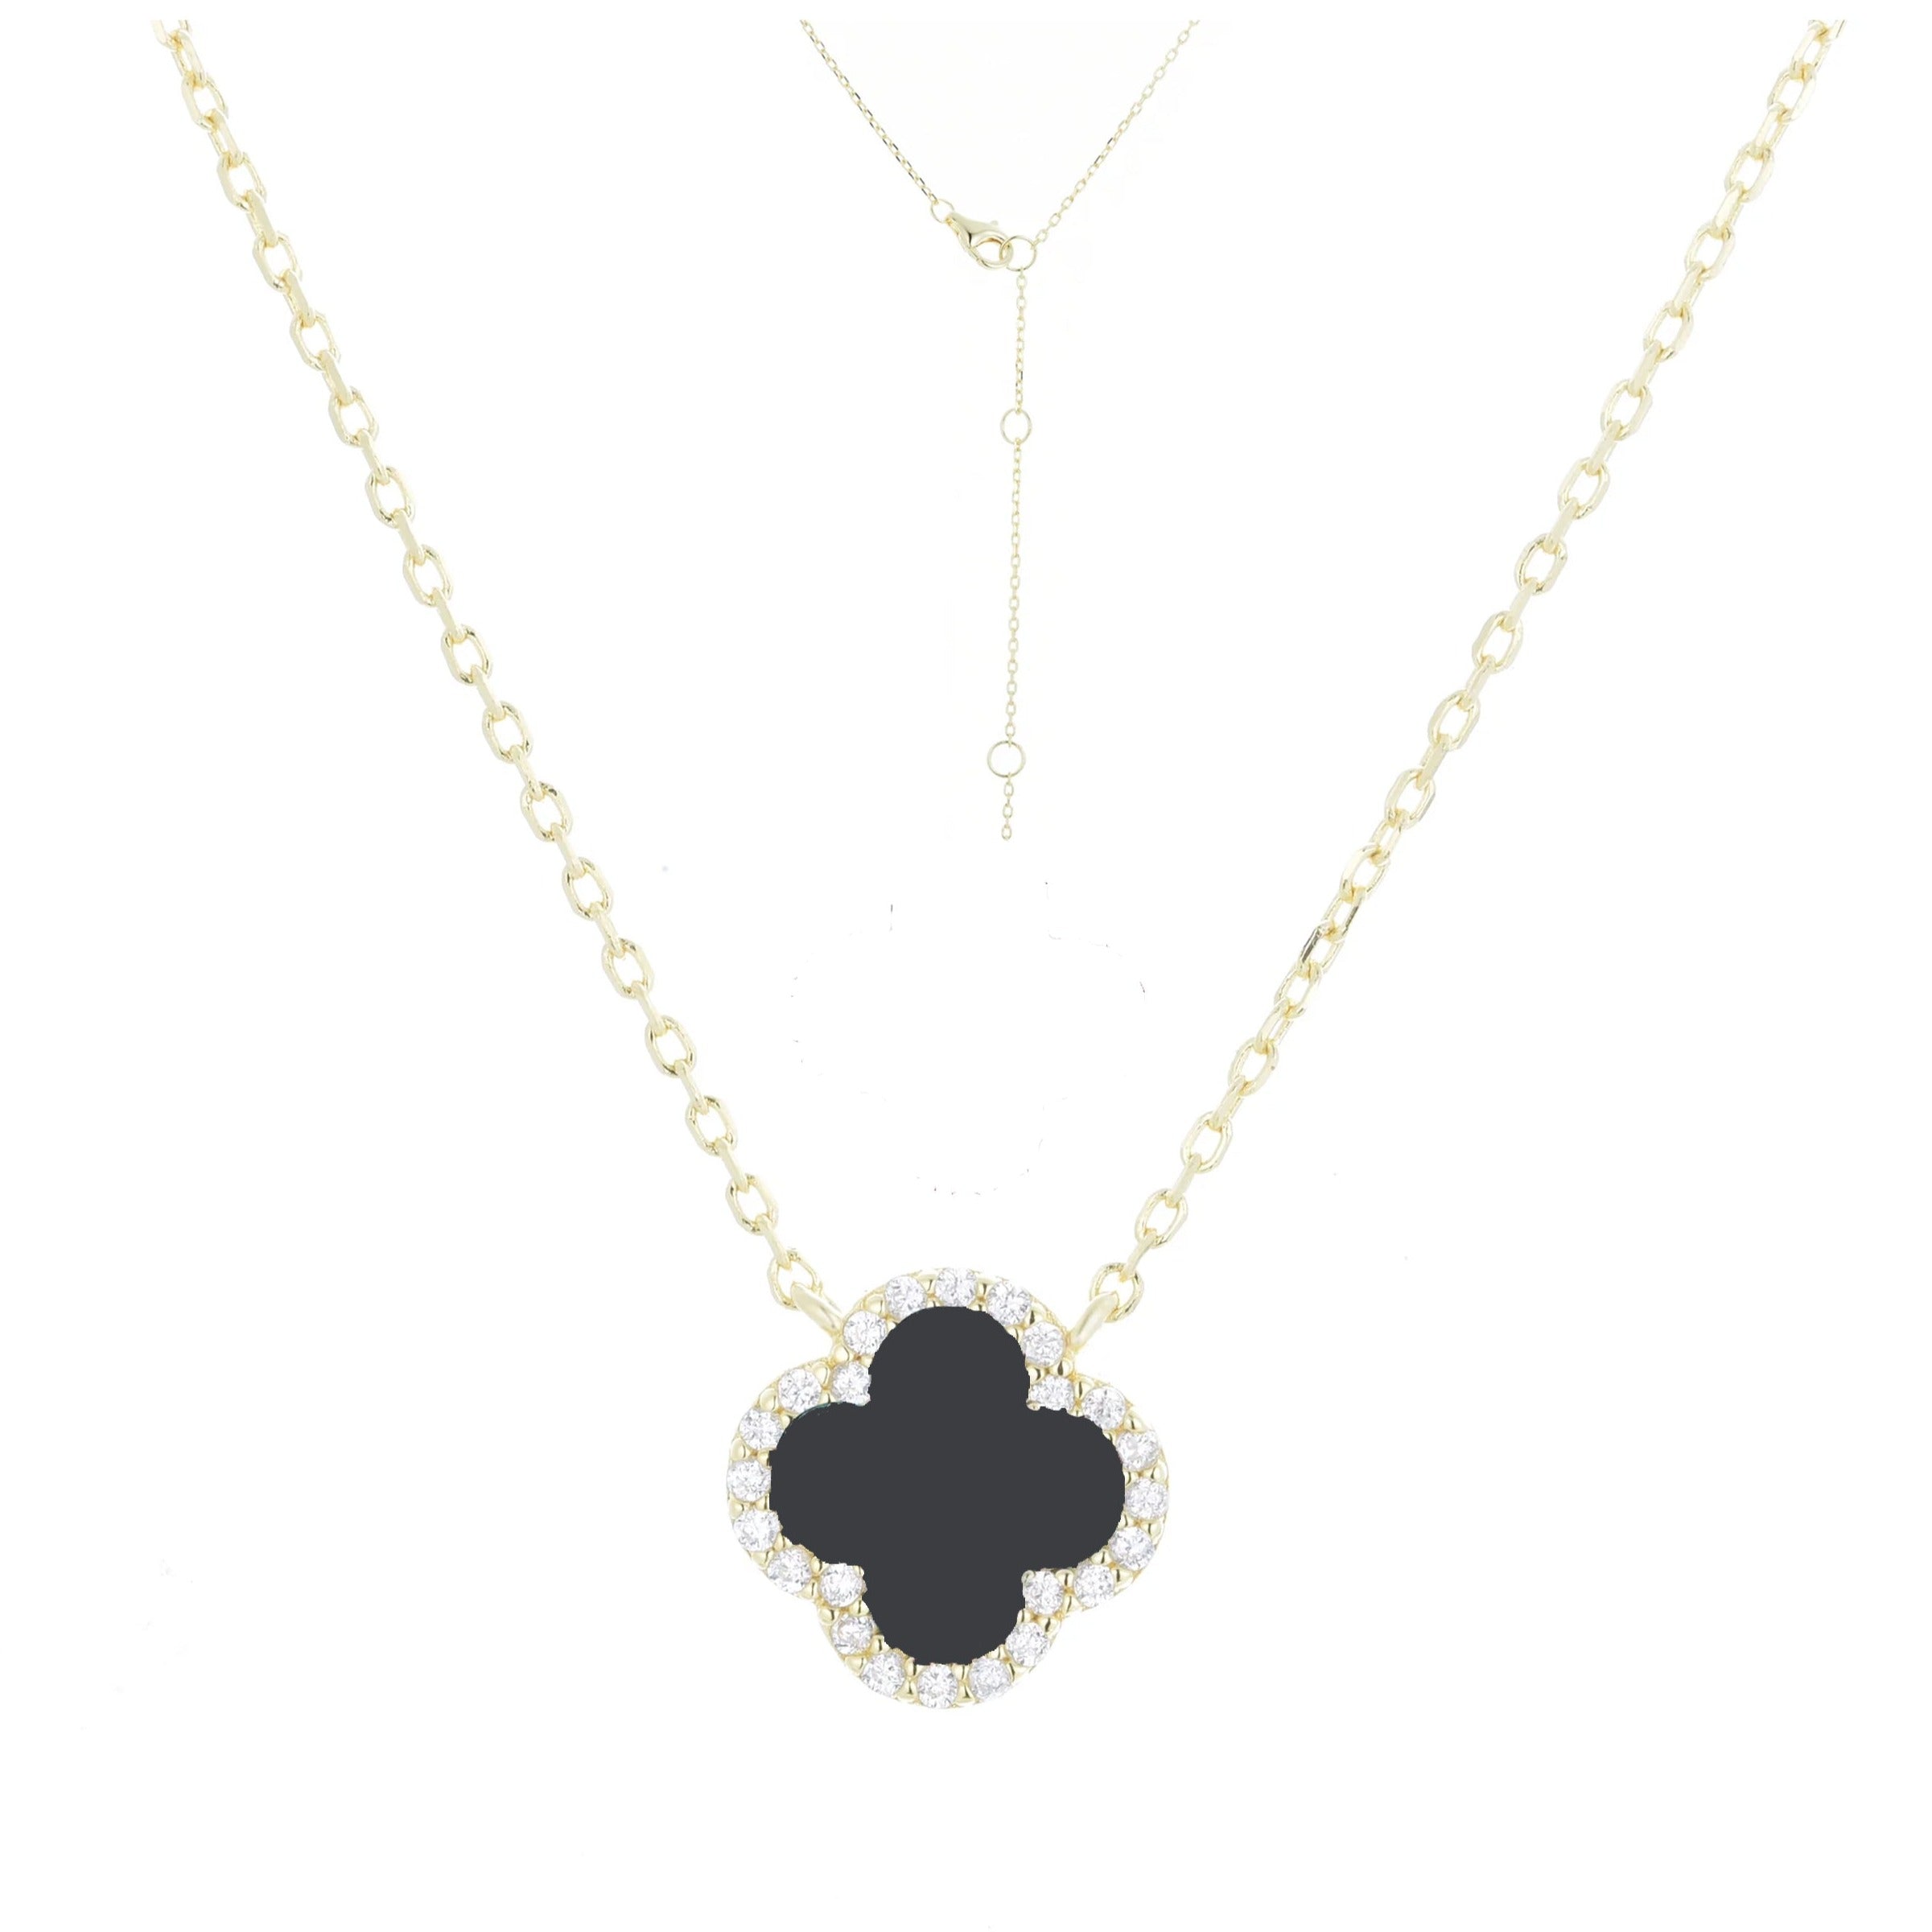 Clover Necklace with Black Onyx and Cubic Zirconia (Gold)